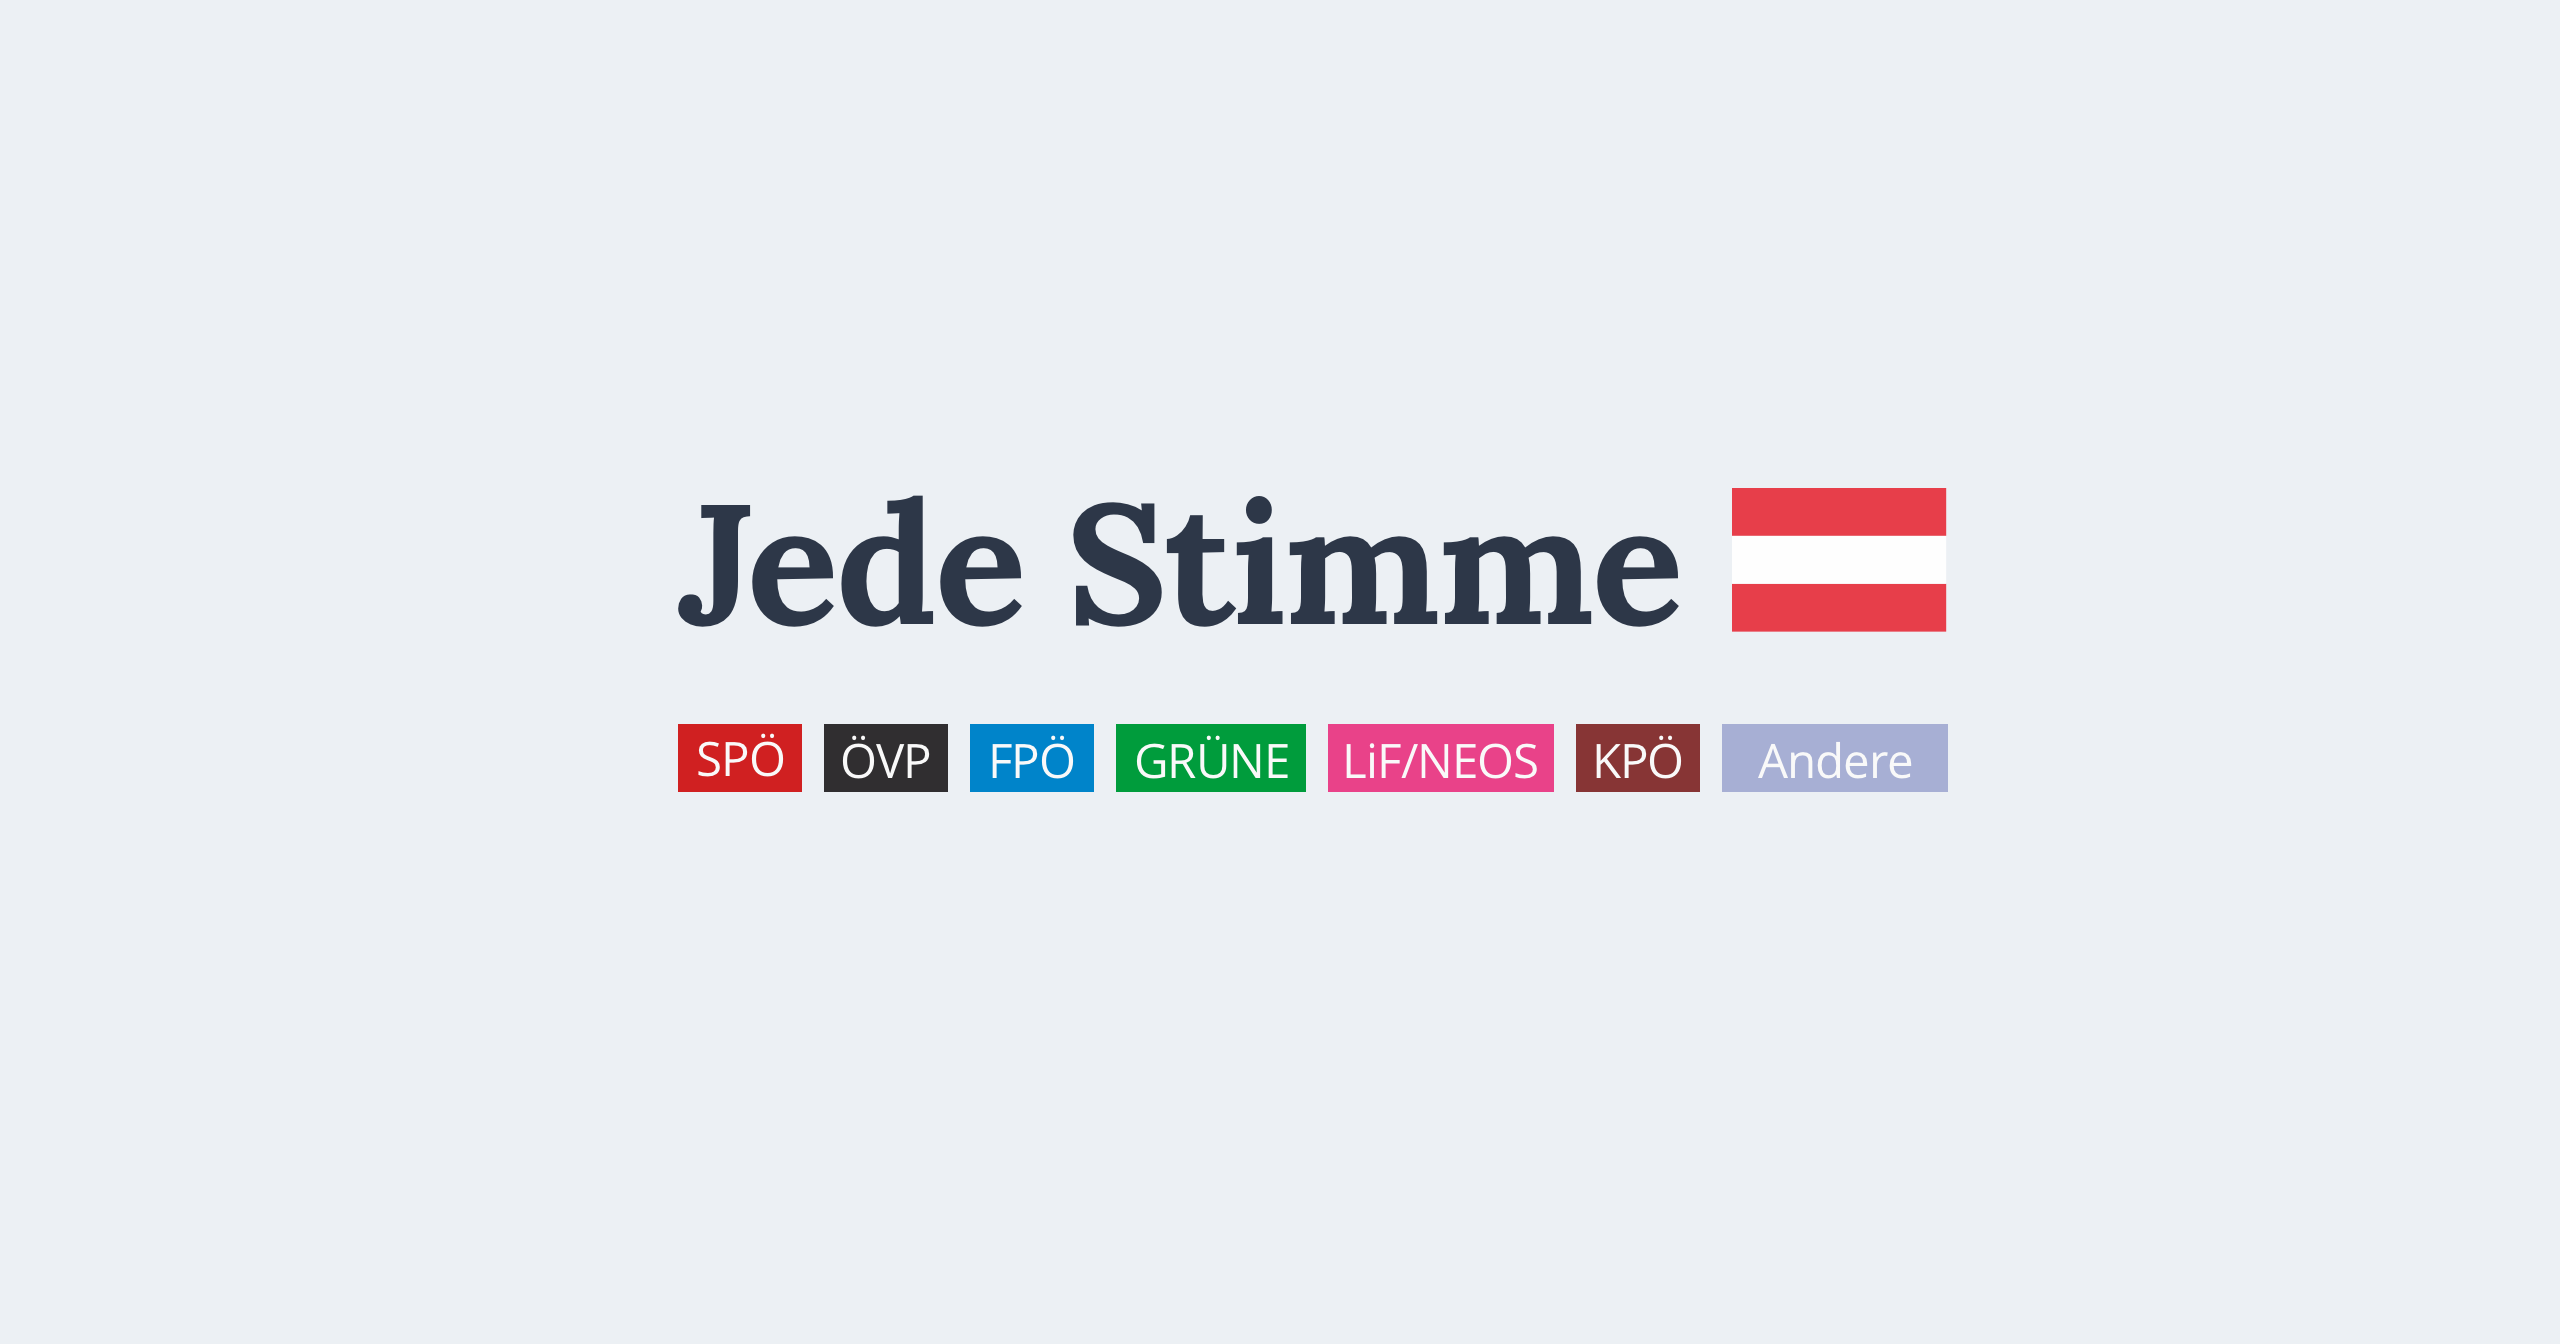 (c) Jede-stimme.at